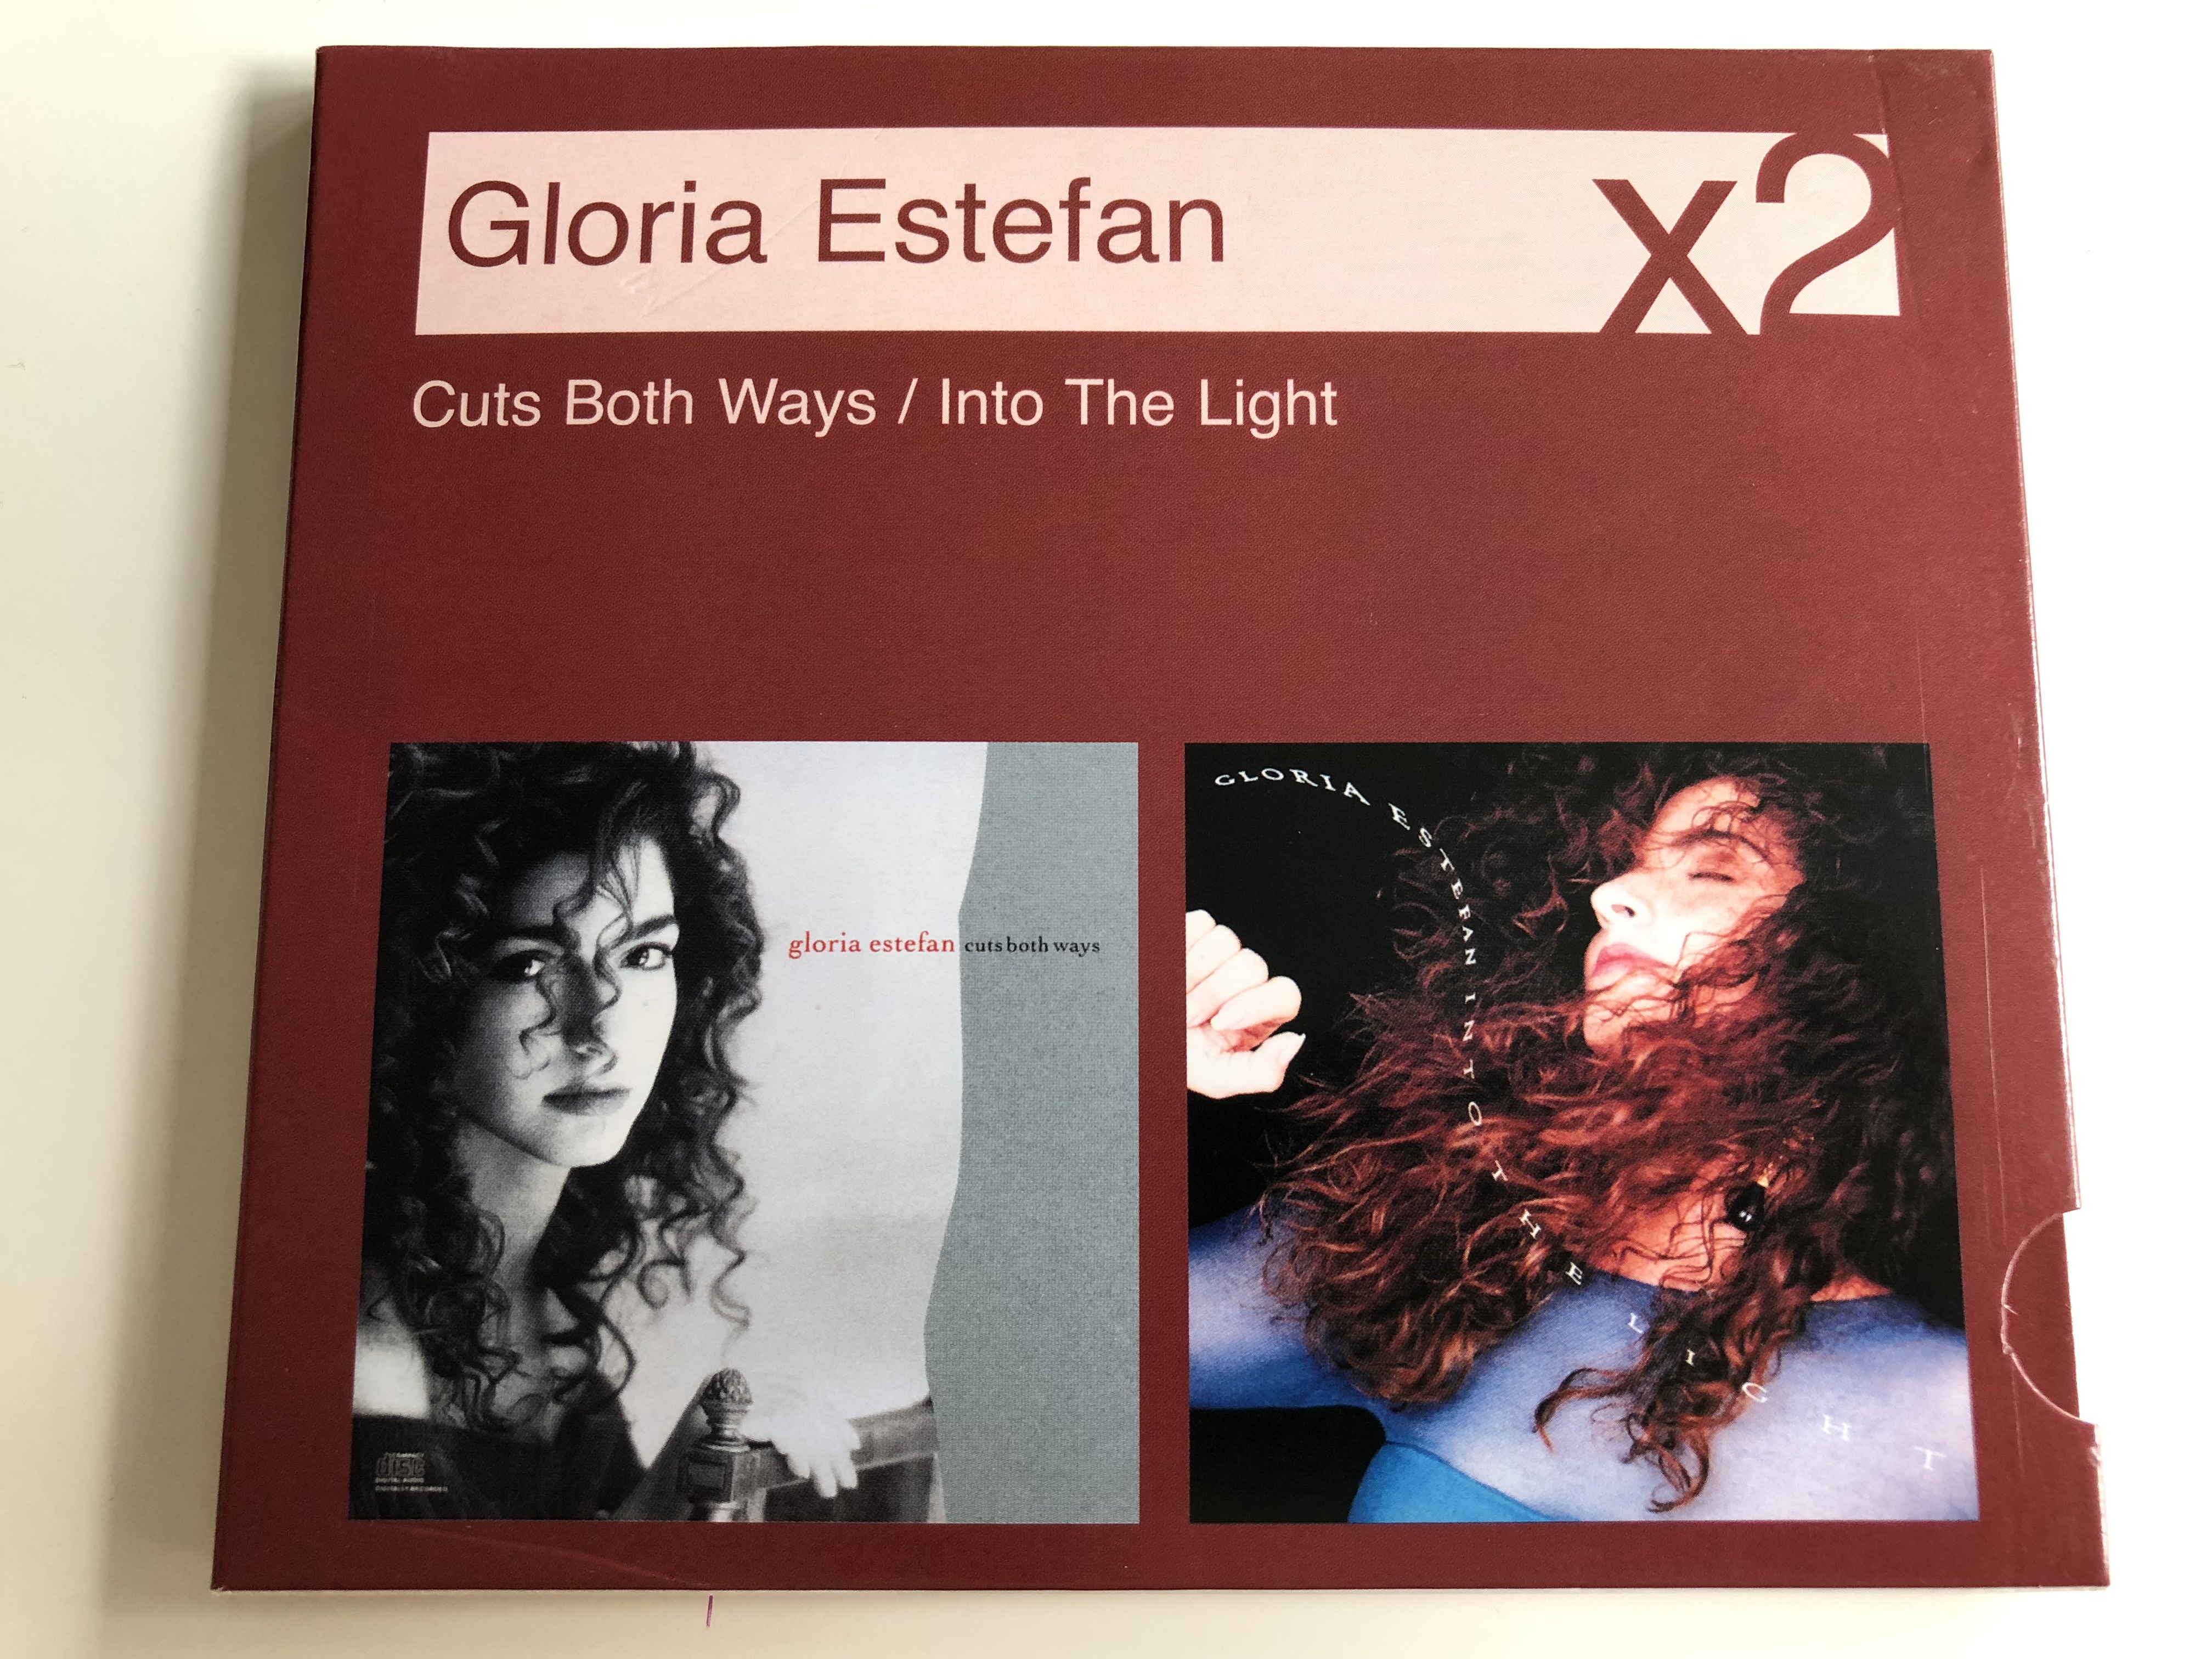 gloria-estefan-x2-cuts-both-ways-into-the-light-audio-cd-2007-here-we-are-nothin-new-get-on-your-feet-si-voy-a-perderte-seal-our-fate-close-my-eyes-light-of-love-2-cd-sony-bmg-1-.jpg